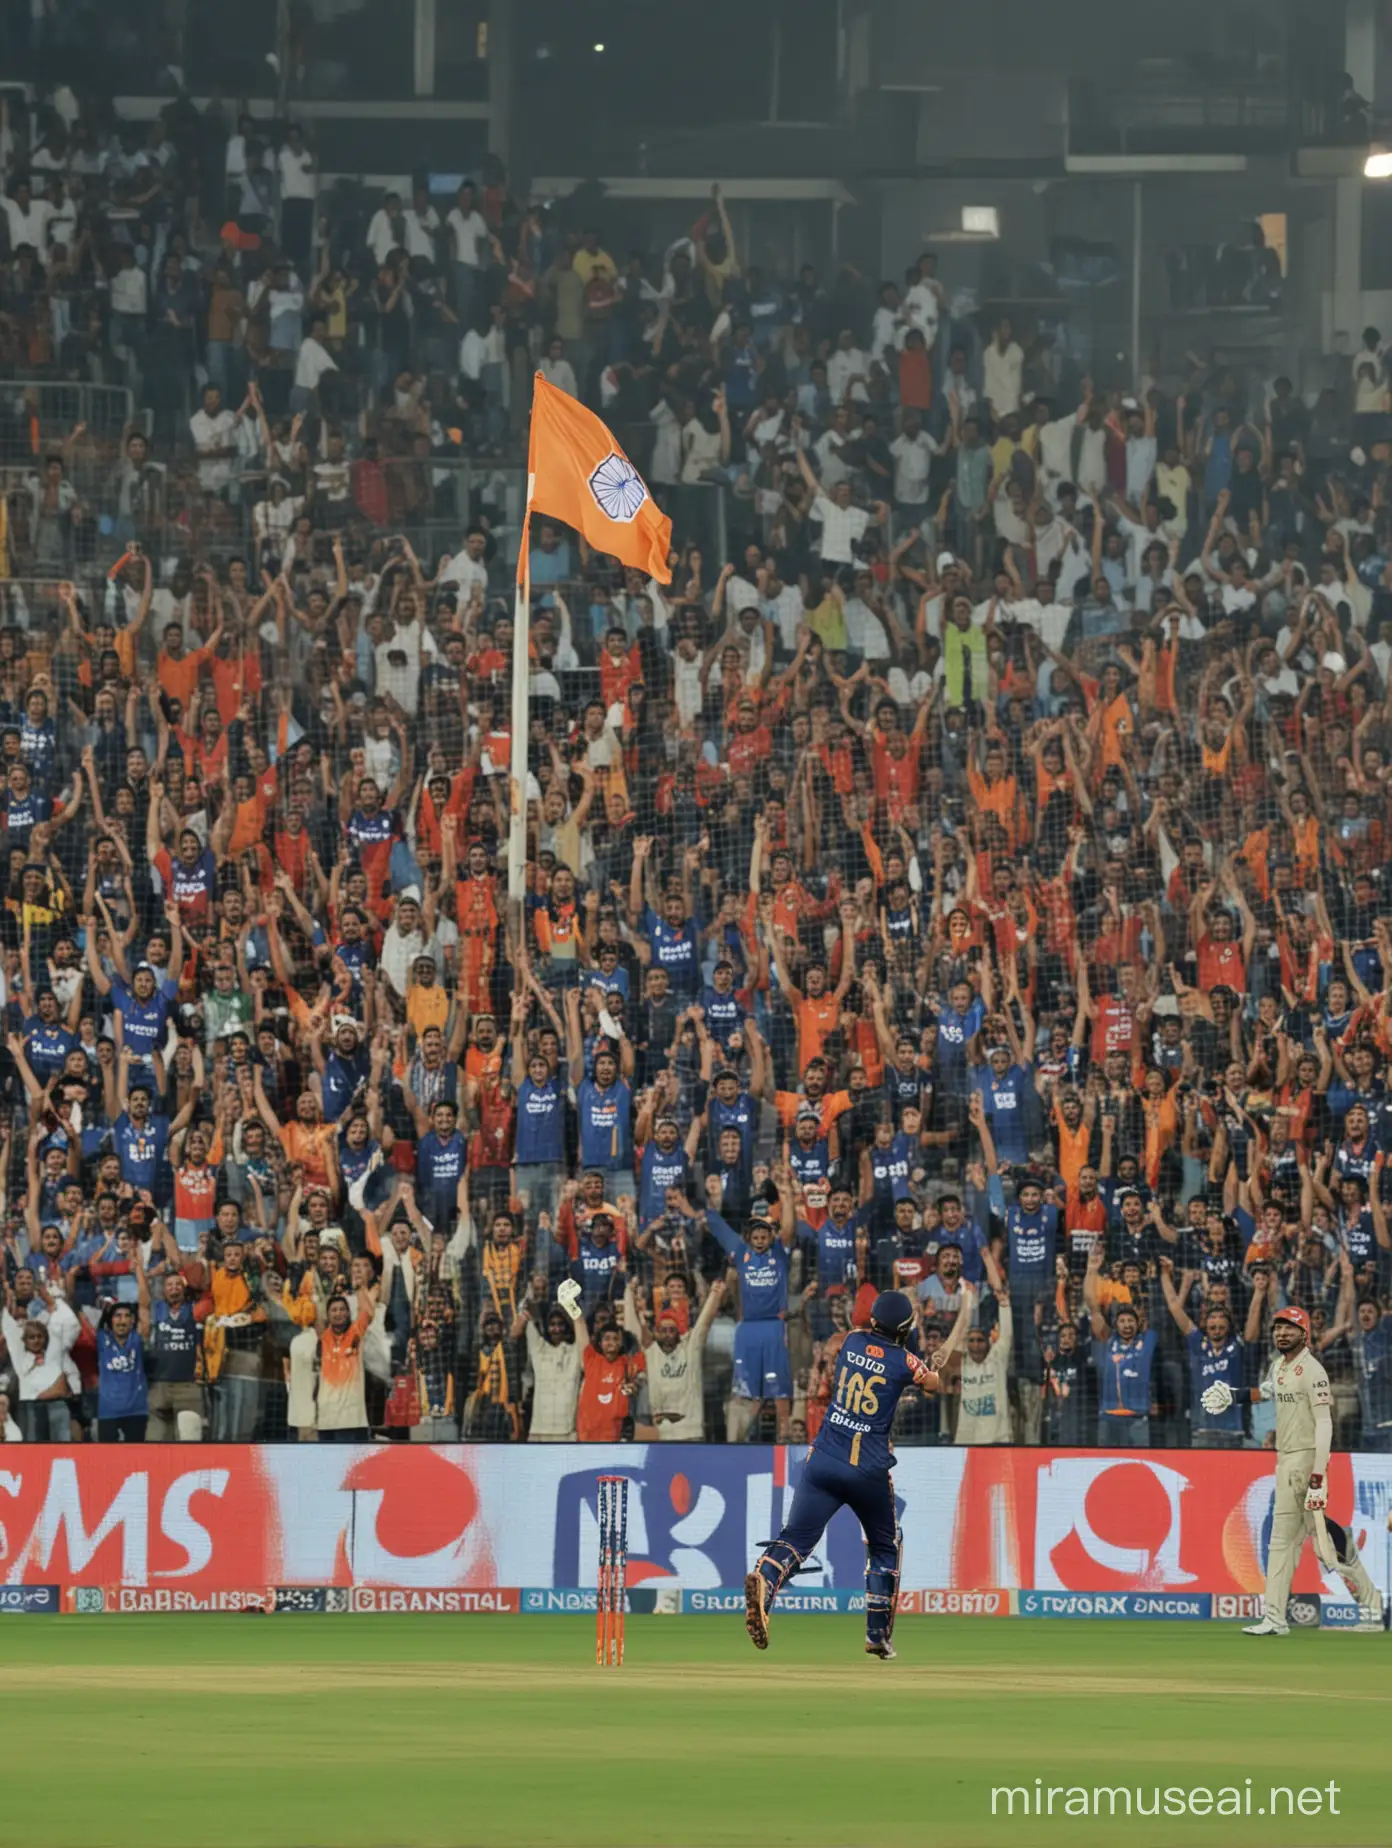 Exciting Cricket Match at Indian Premier League